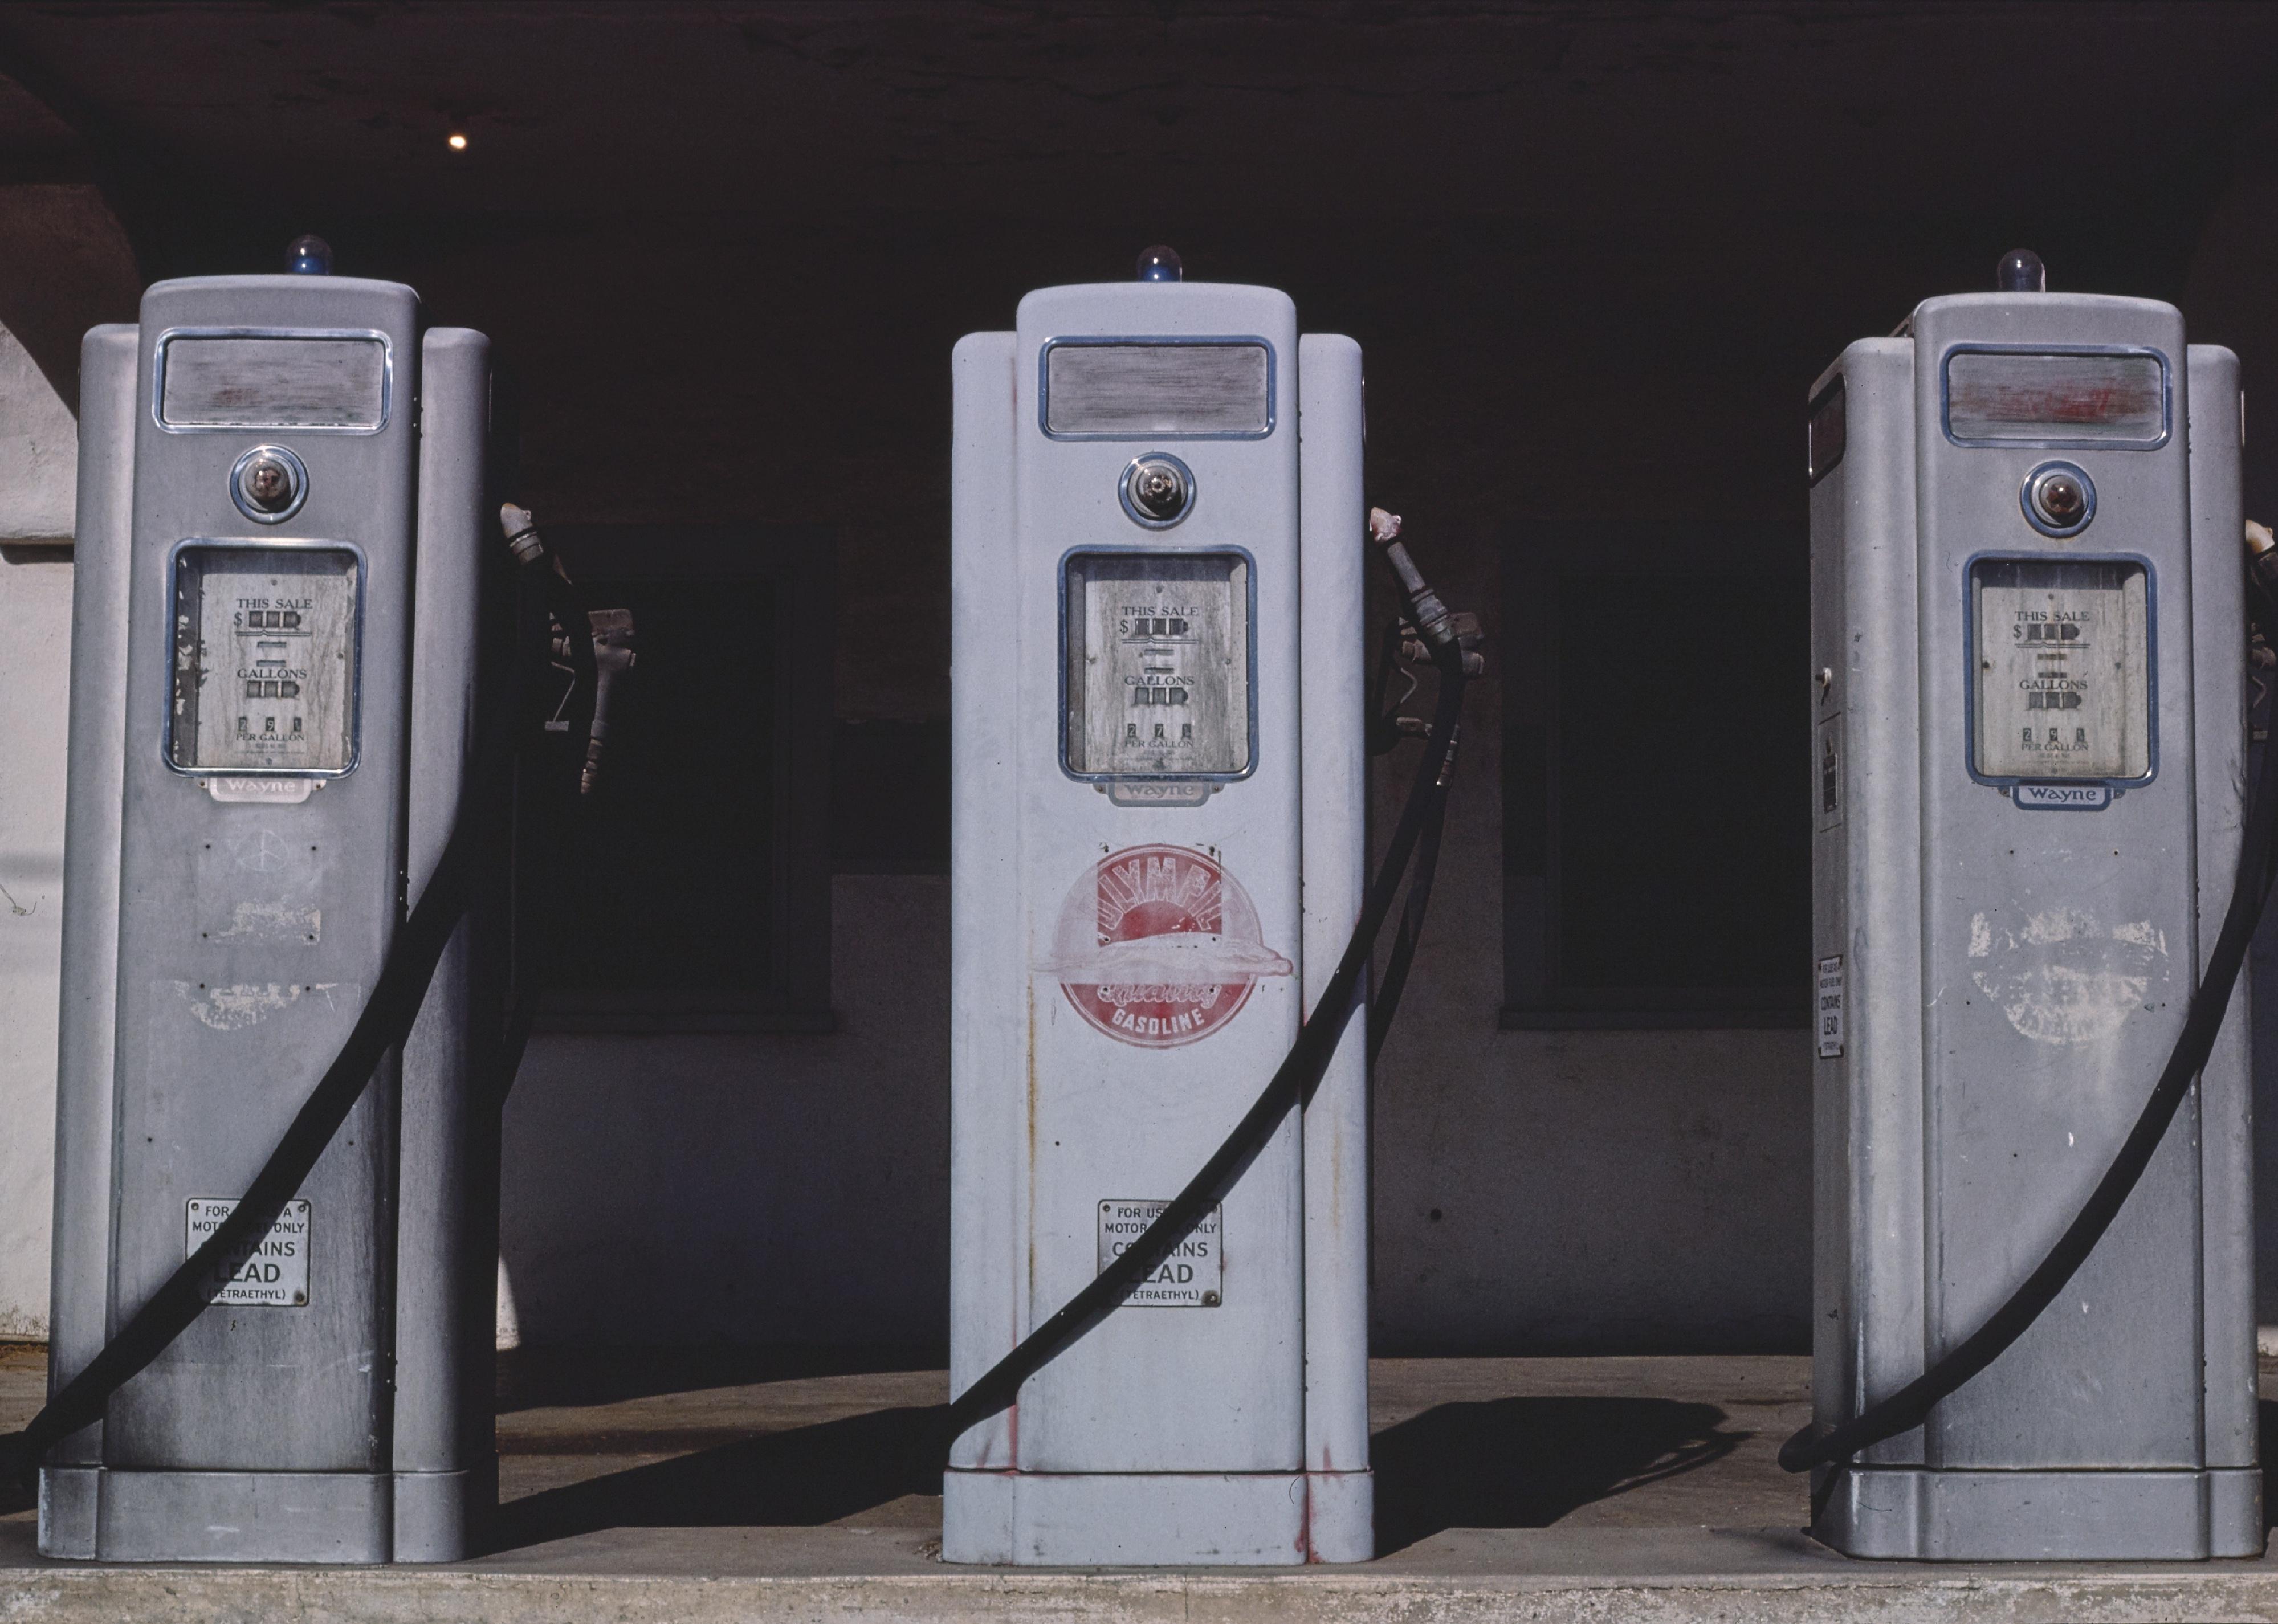 <p>In 1964, an inventor named Herb Timms created a system that allowed a single attendant to control all the pumps at a gas station from a remote location. The pumps pictured here at a San Diego gas station are early examples of self-service stations.</p>